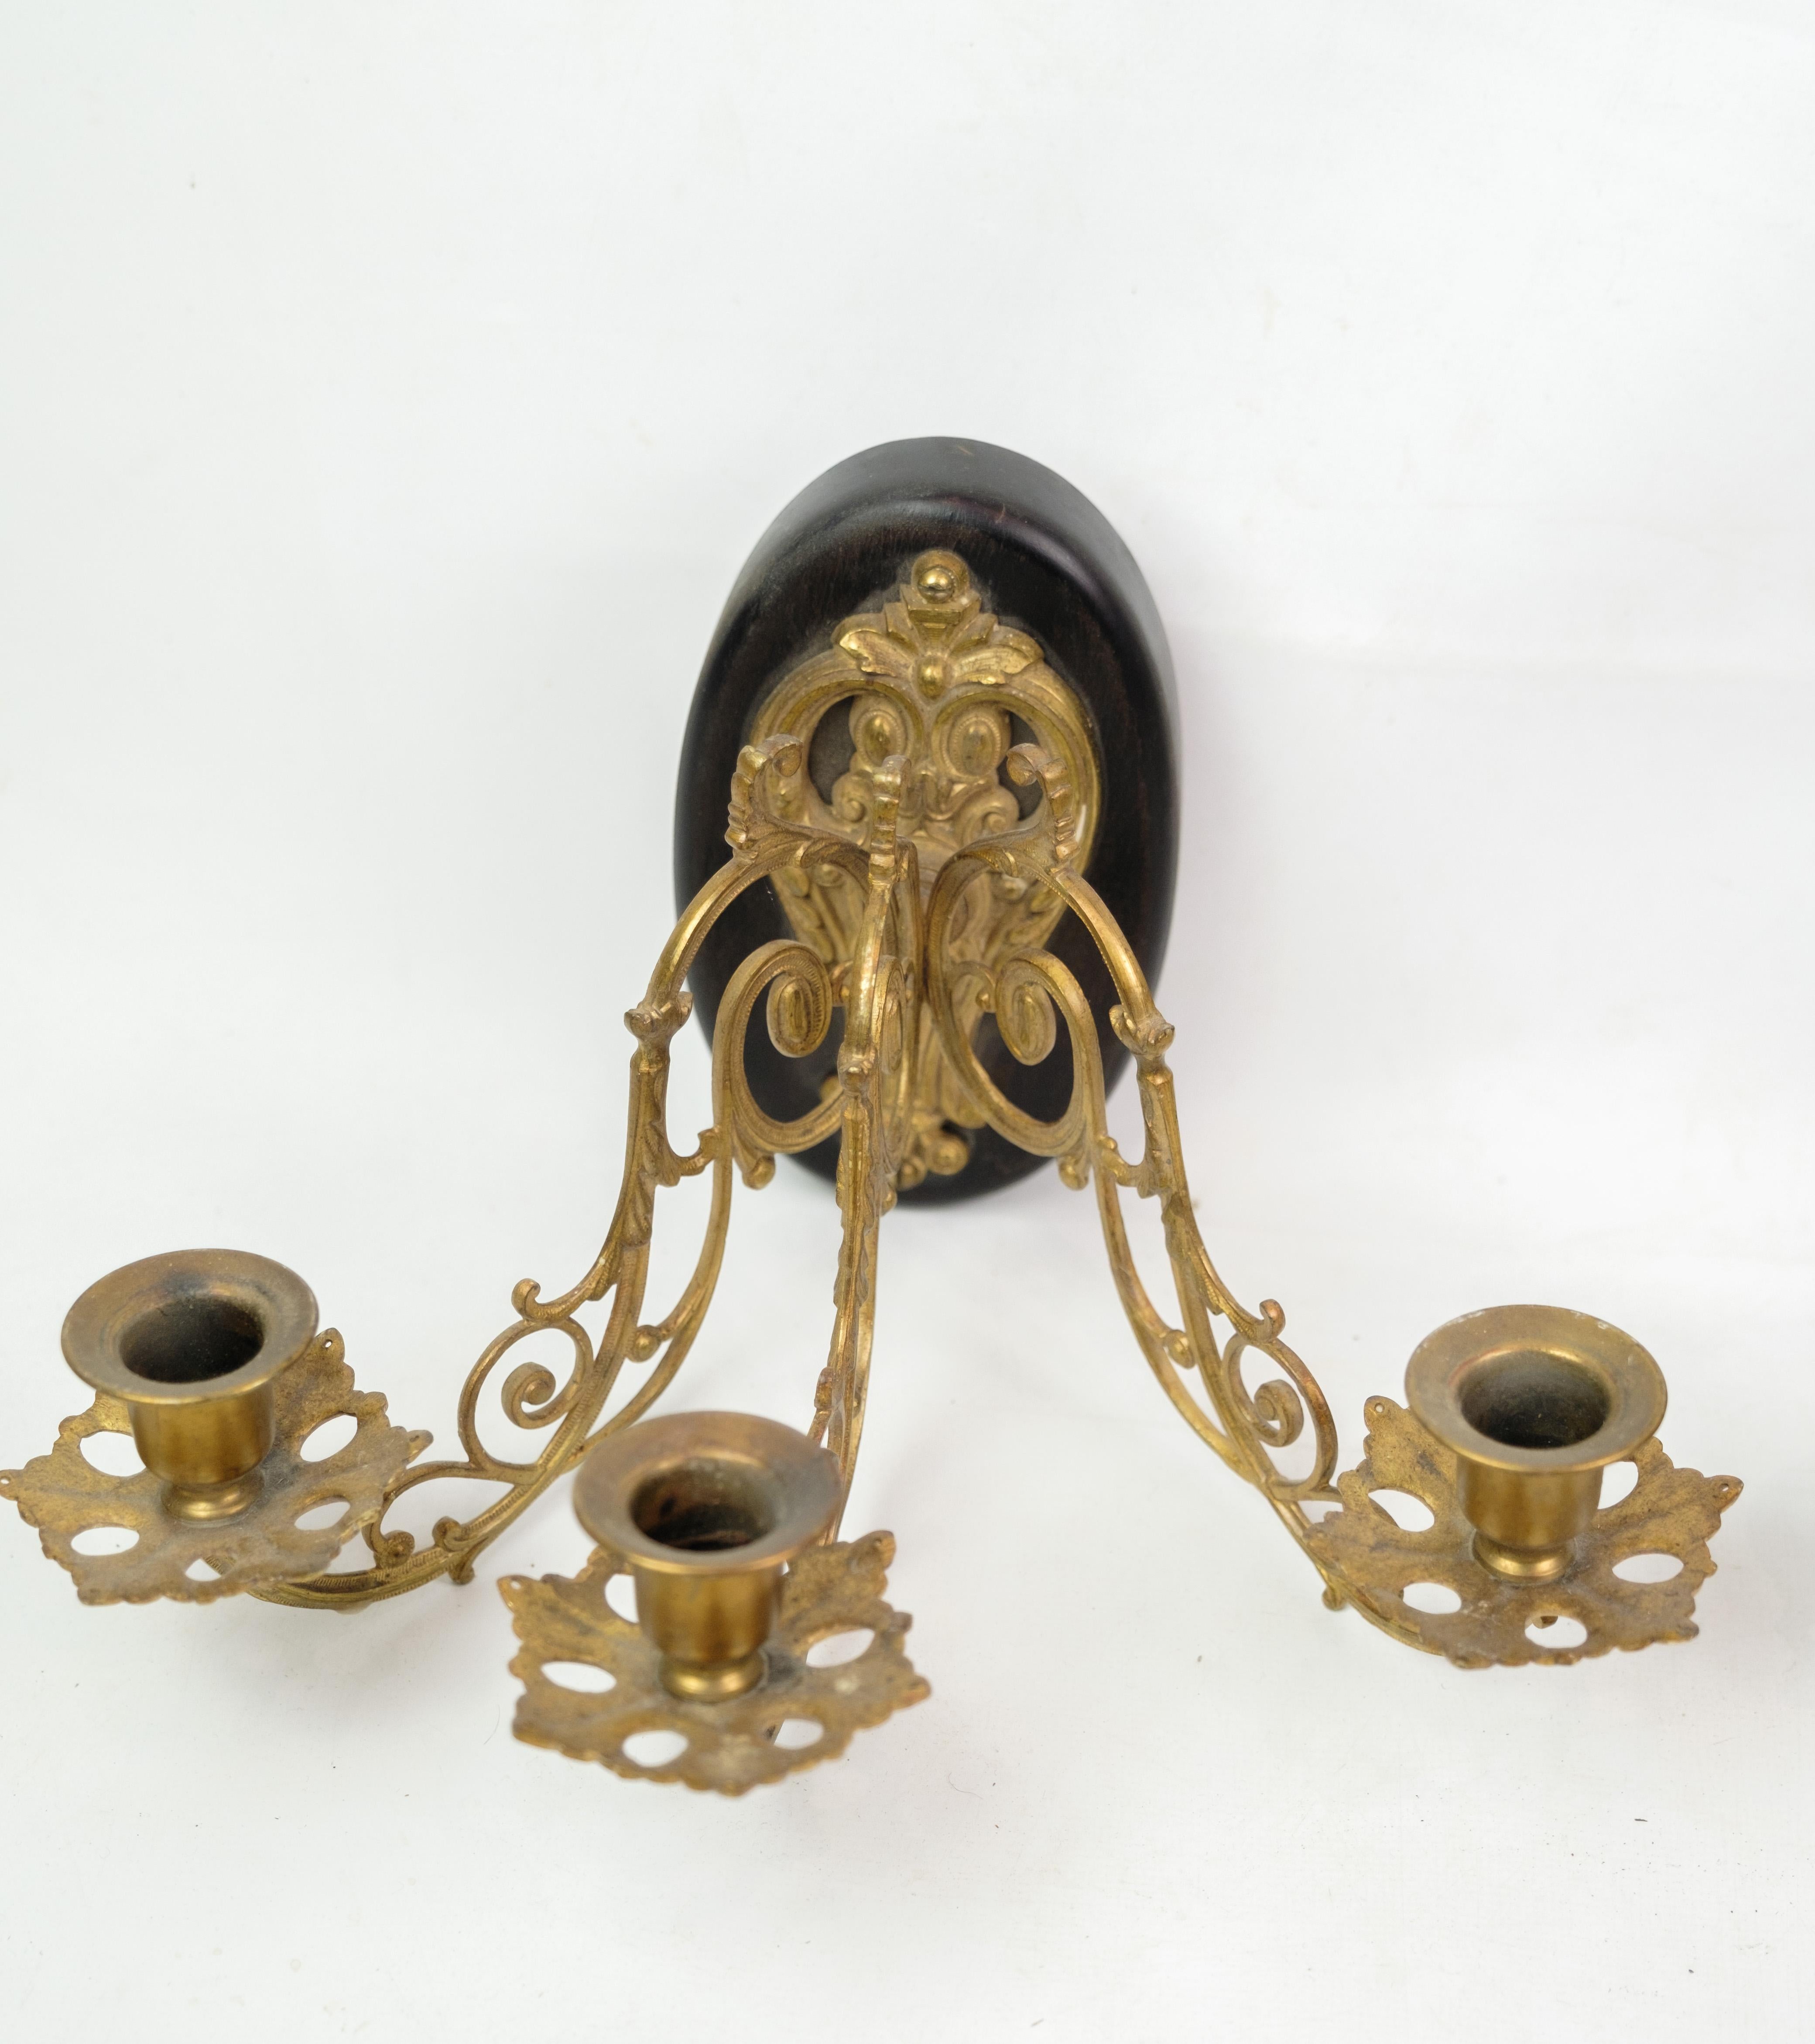 Experience an antique atmosphere with this pair of French bronze wall sconces from the 1930s. These wall sconces are more than just lighting fixtures; they are timeless works of art that bring the charm of a bygone era into your home.

The bronze